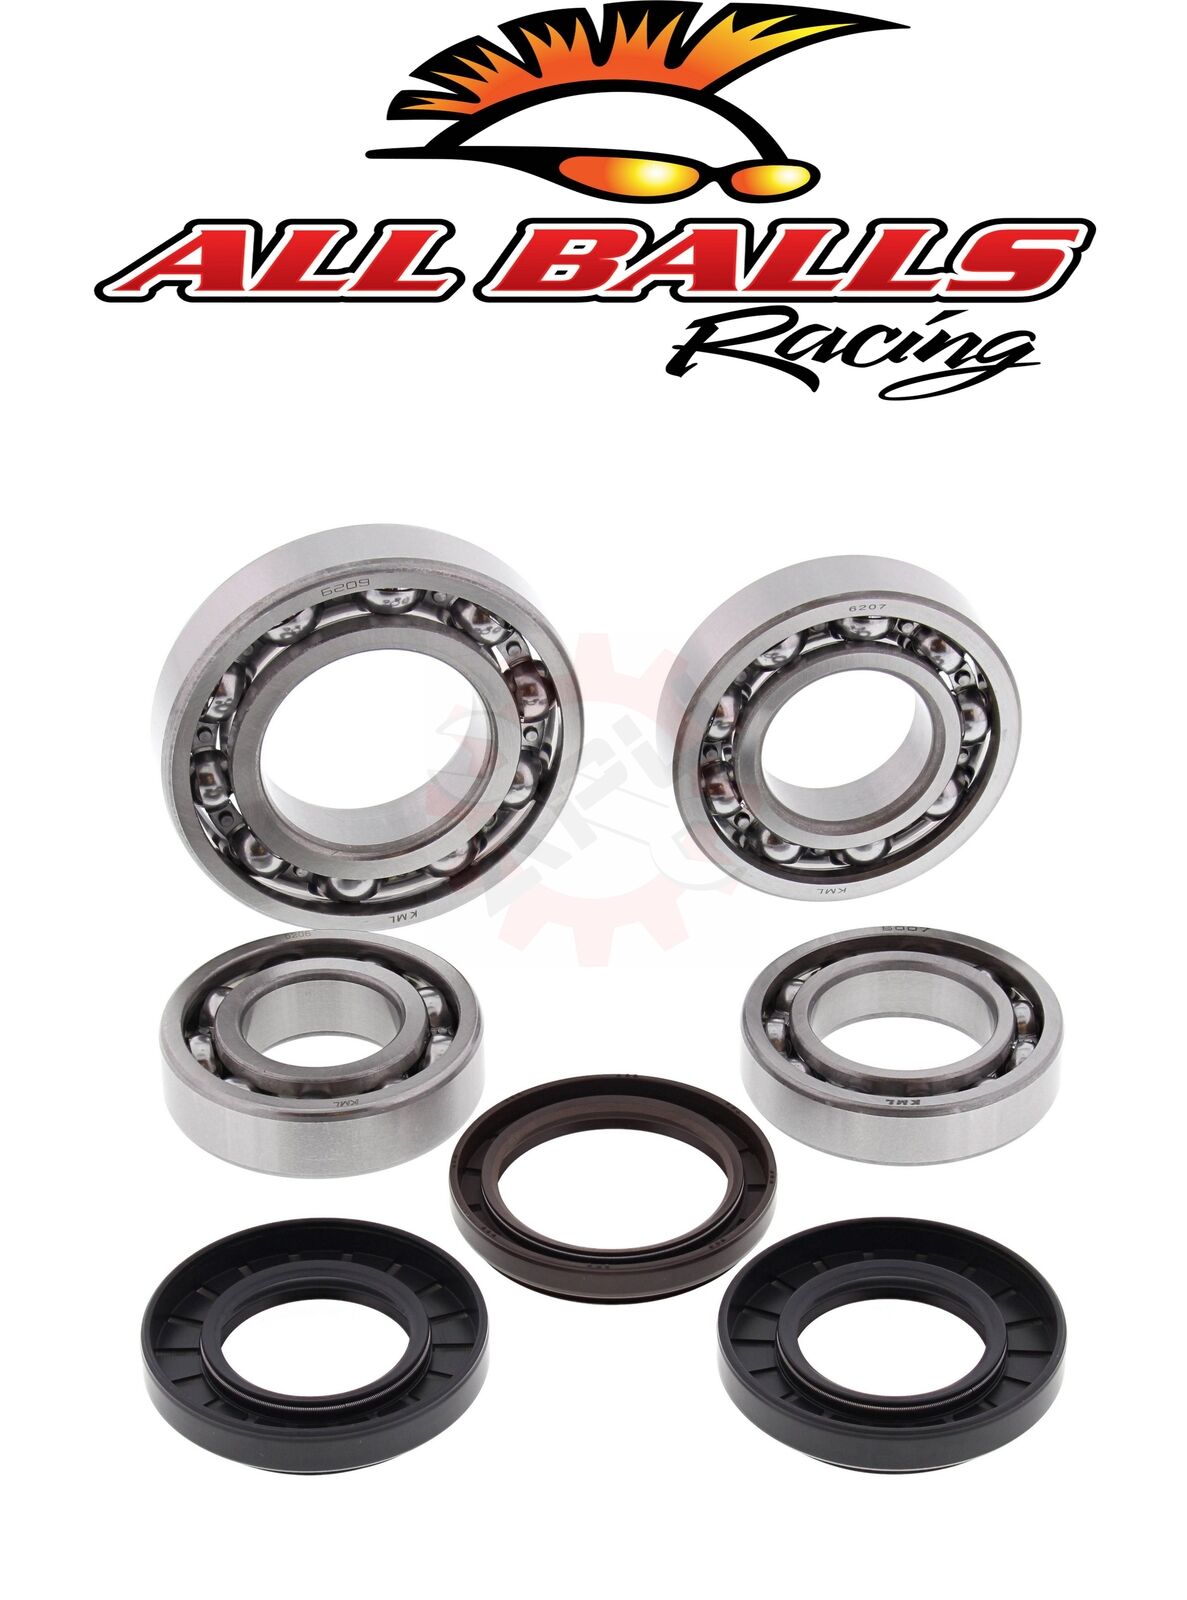 All Balls Rear Differential Bearings 450 Grizzly 2011-2014 Yamaha IRS 25-2099